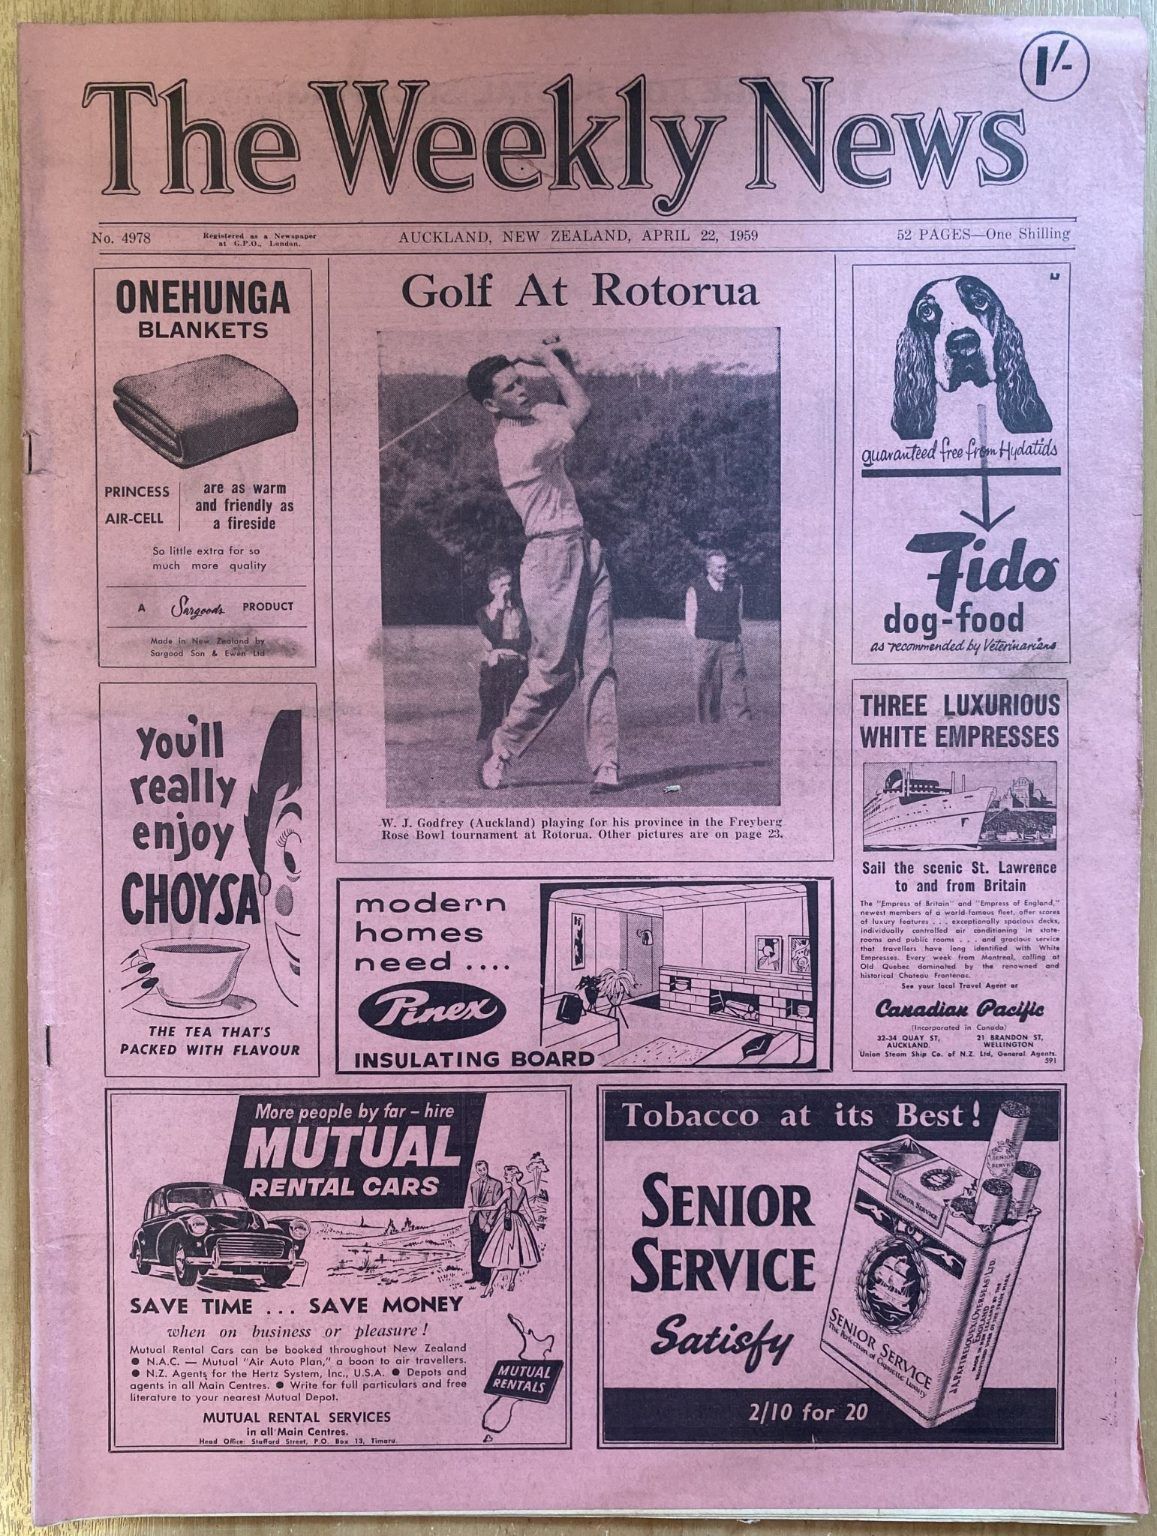 OLD NEWSPAPER: The Weekly News - No. 4978, 22 April 1959